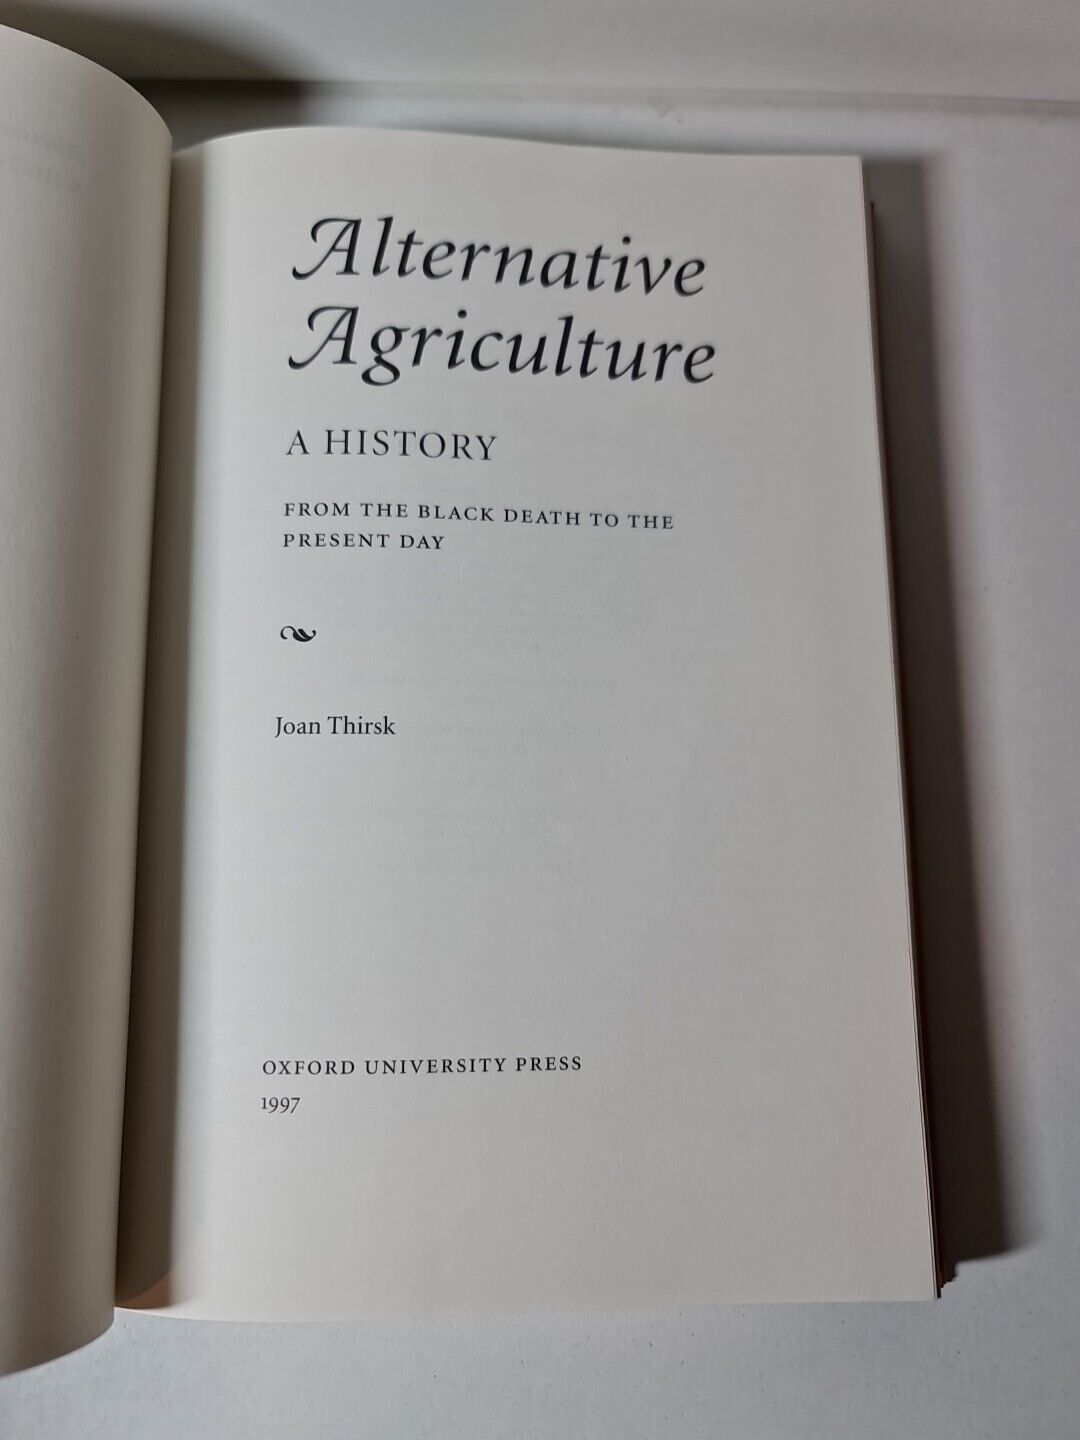 Alternative Agriculture: A History: From the Black Death... by Thrisk (1997)